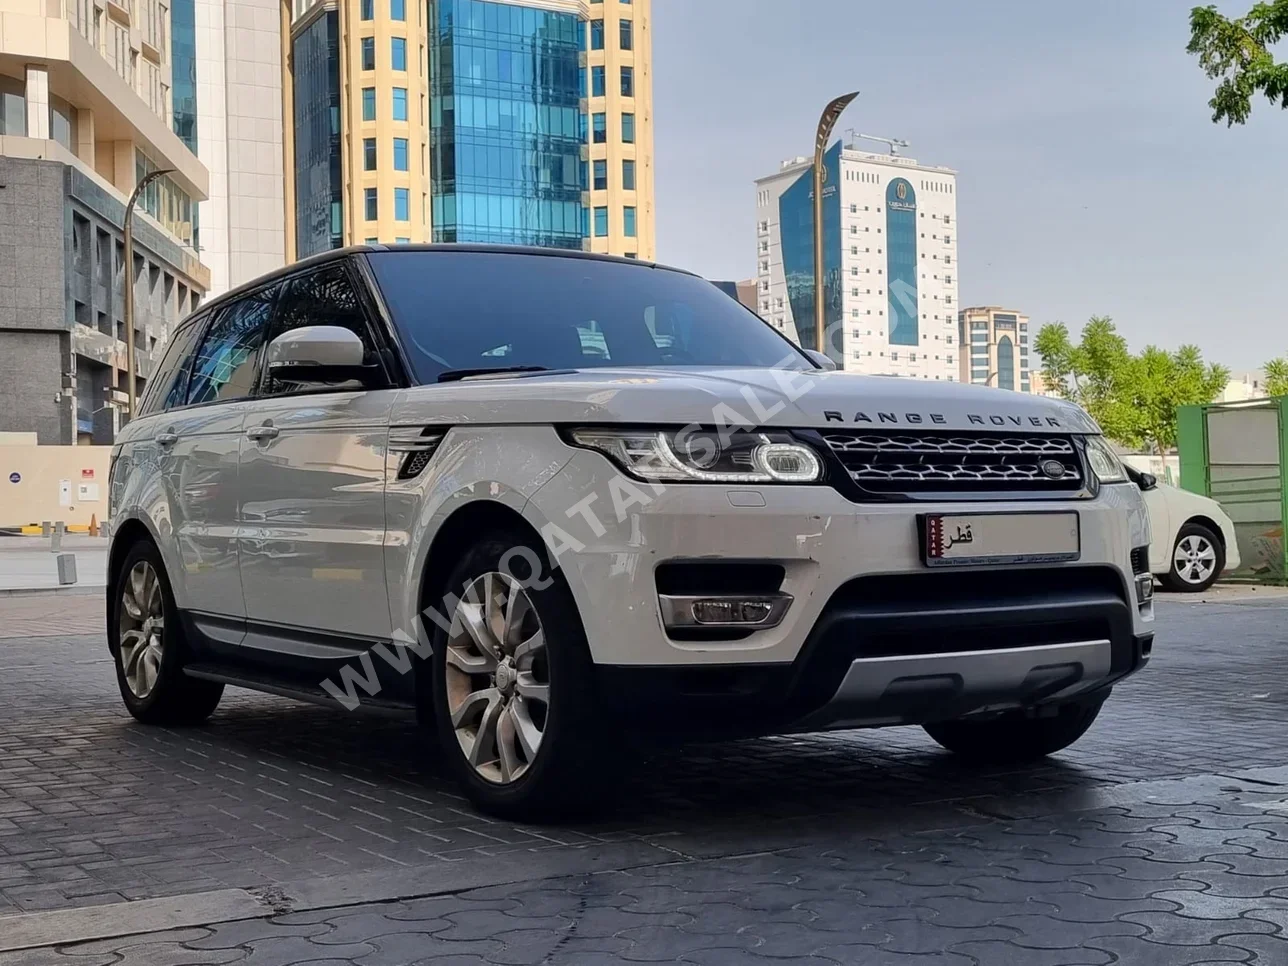 Land Rover  Range Rover  Sport  2014  Automatic  144,000 Km  6 Cylinder  Four Wheel Drive (4WD)  SUV  White